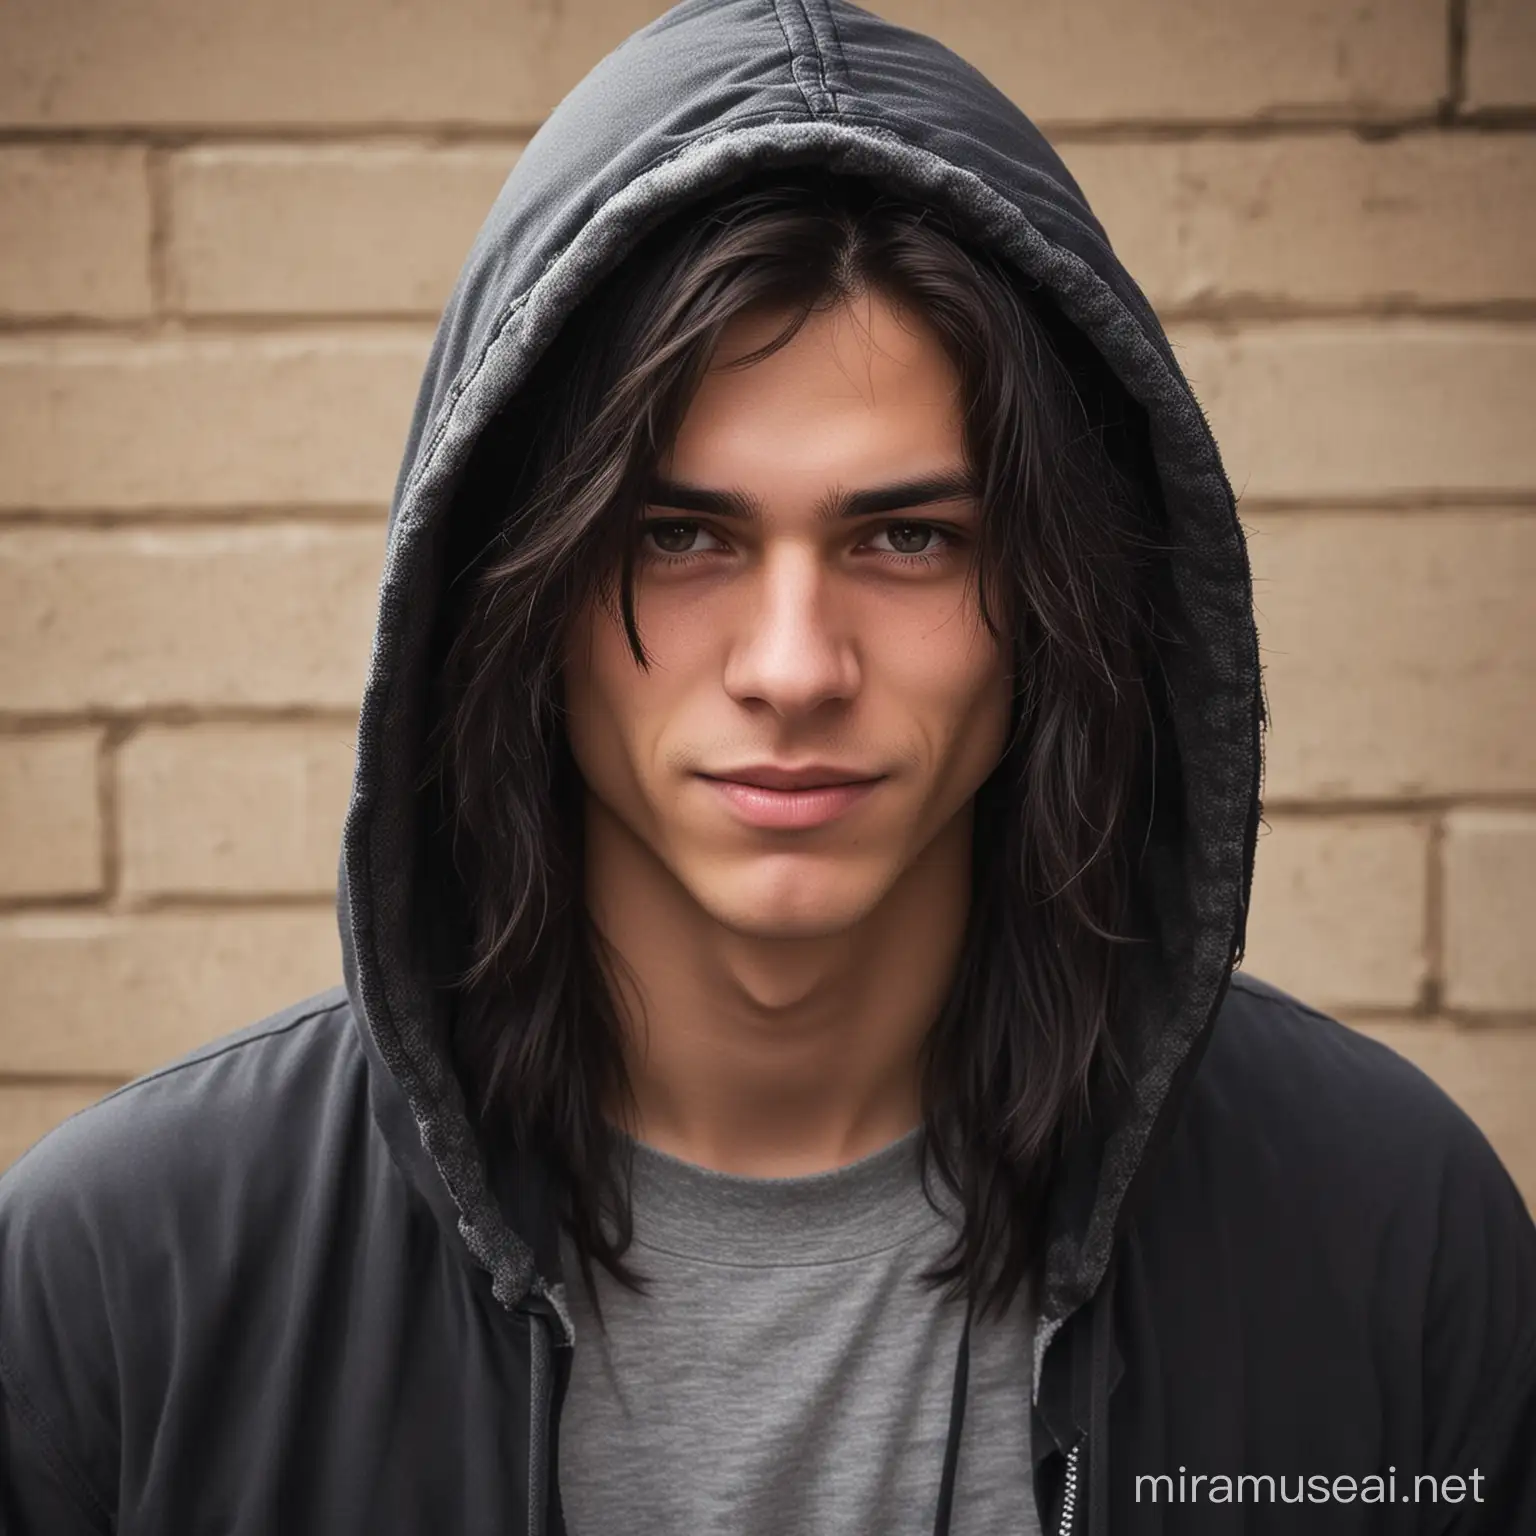 High School New Kid, an Outsider, Mysterious and Roguish, He definitely has secrets, His hood obscures his face partially but you can see his mysterious smirk and his long dark hair partially covering one side of his face